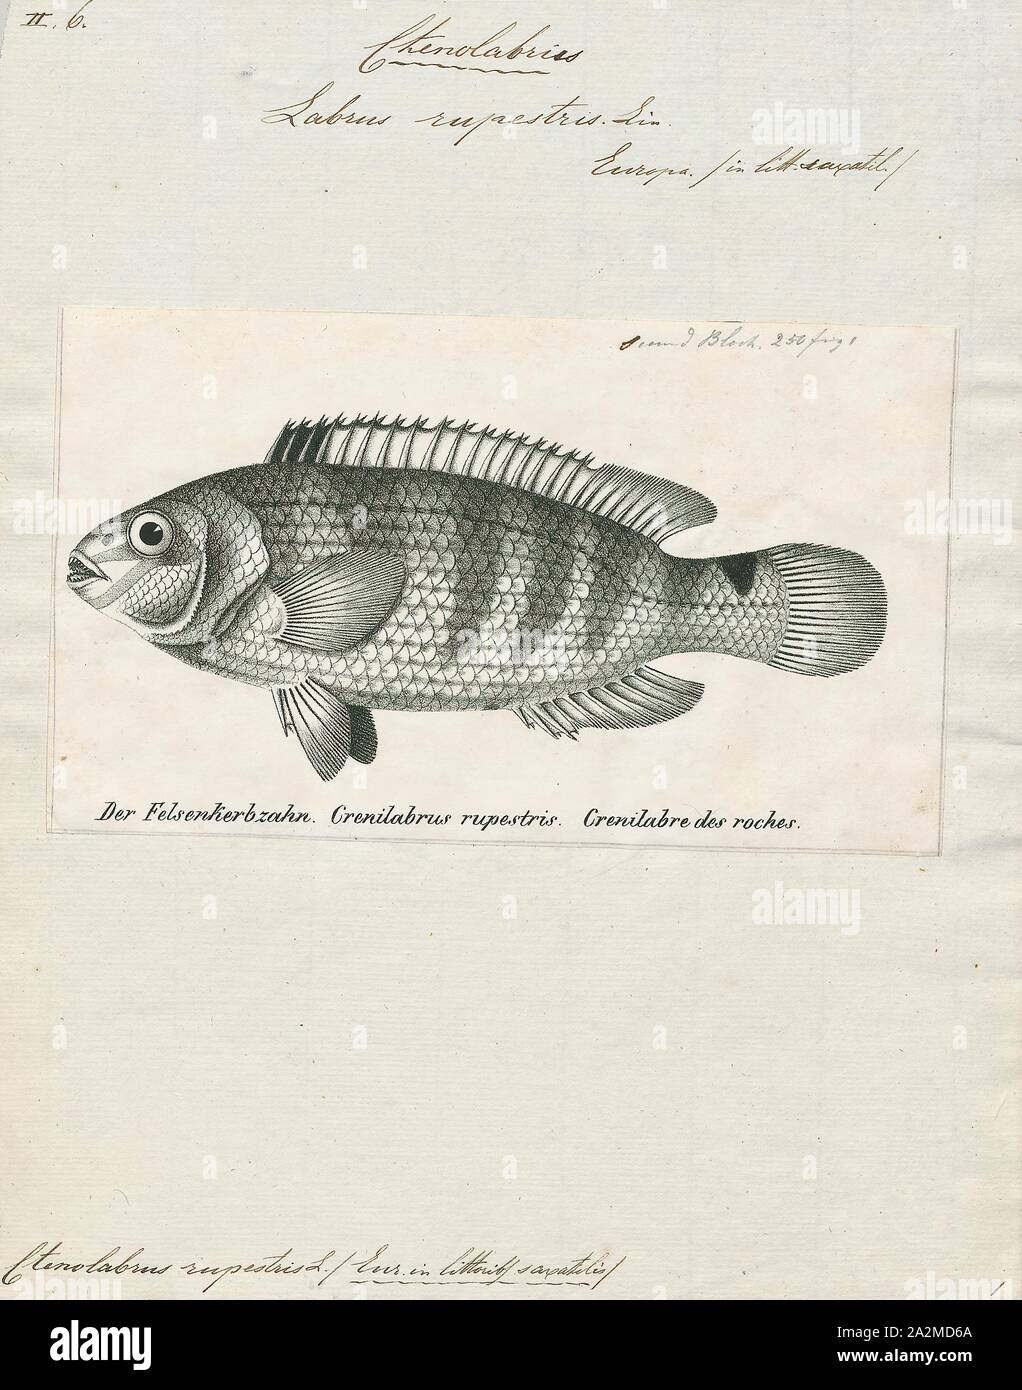 Ctenolabrus rupestris, Print, The goldsinny wrasse (Ctenolabrus rupestris) is a species of wrasse native to the eastern Atlantic Ocean, the Mediterranean Sea, and the Black Sea where they inhabit weedy, rocky reefs at depths from 1 to 50 m (3.3 to 164.0 ft), though rarely below 20 m (66 ft). This species is the only known member of its genus., 1809-1845 Stock Photo